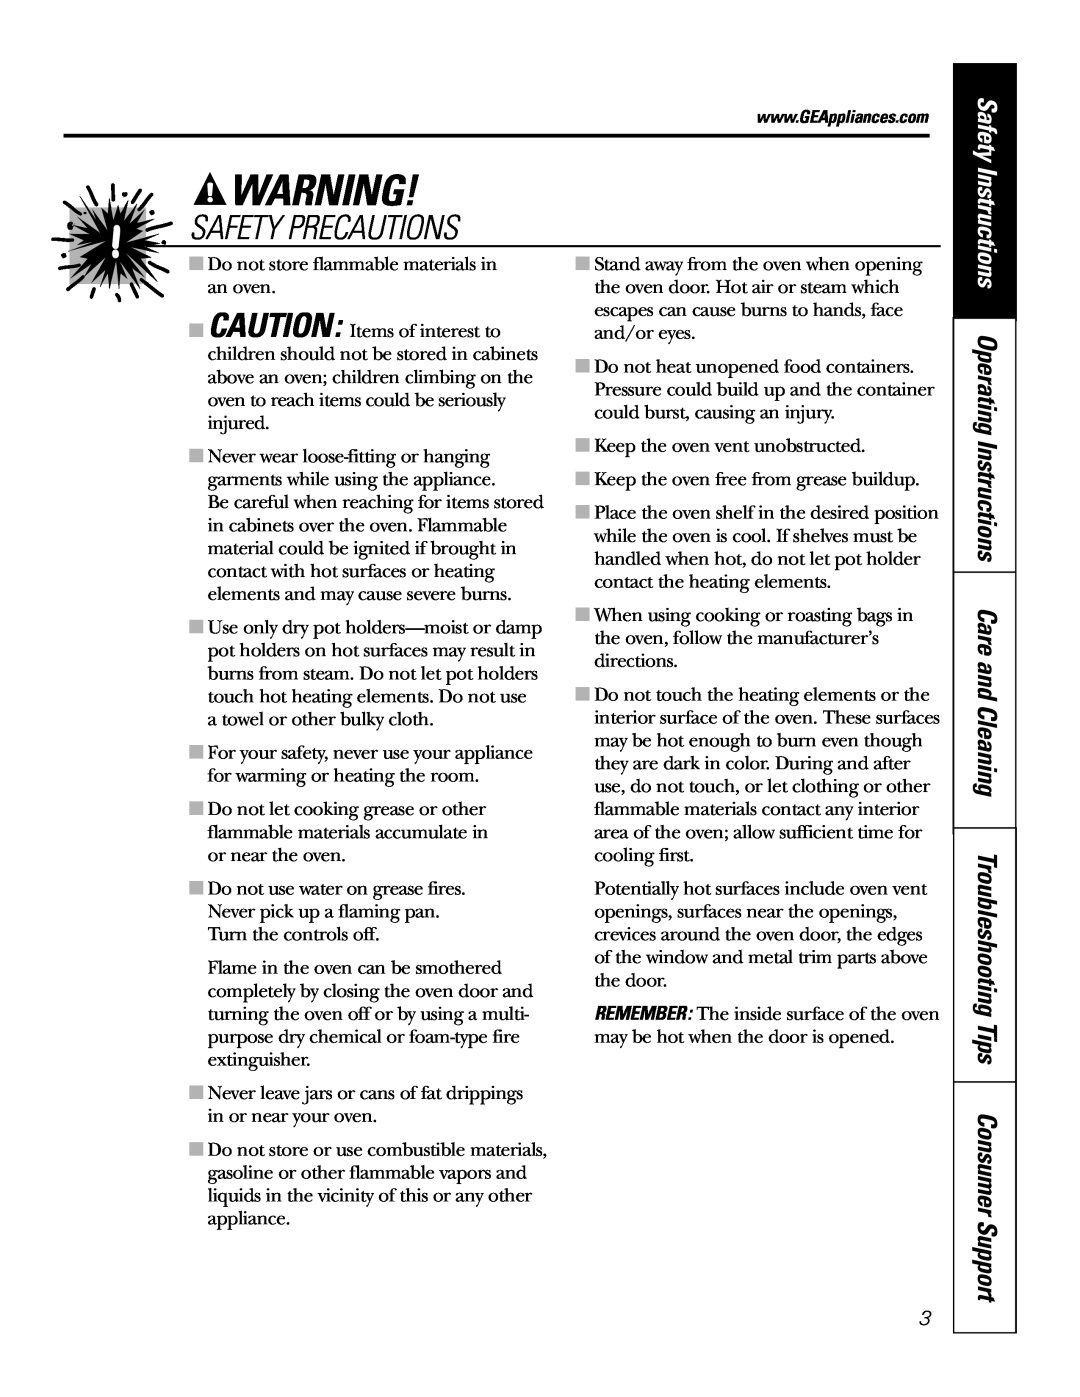 GE JRP 28 owner manual Safety Precautions, Do not store flammable materials in an oven 